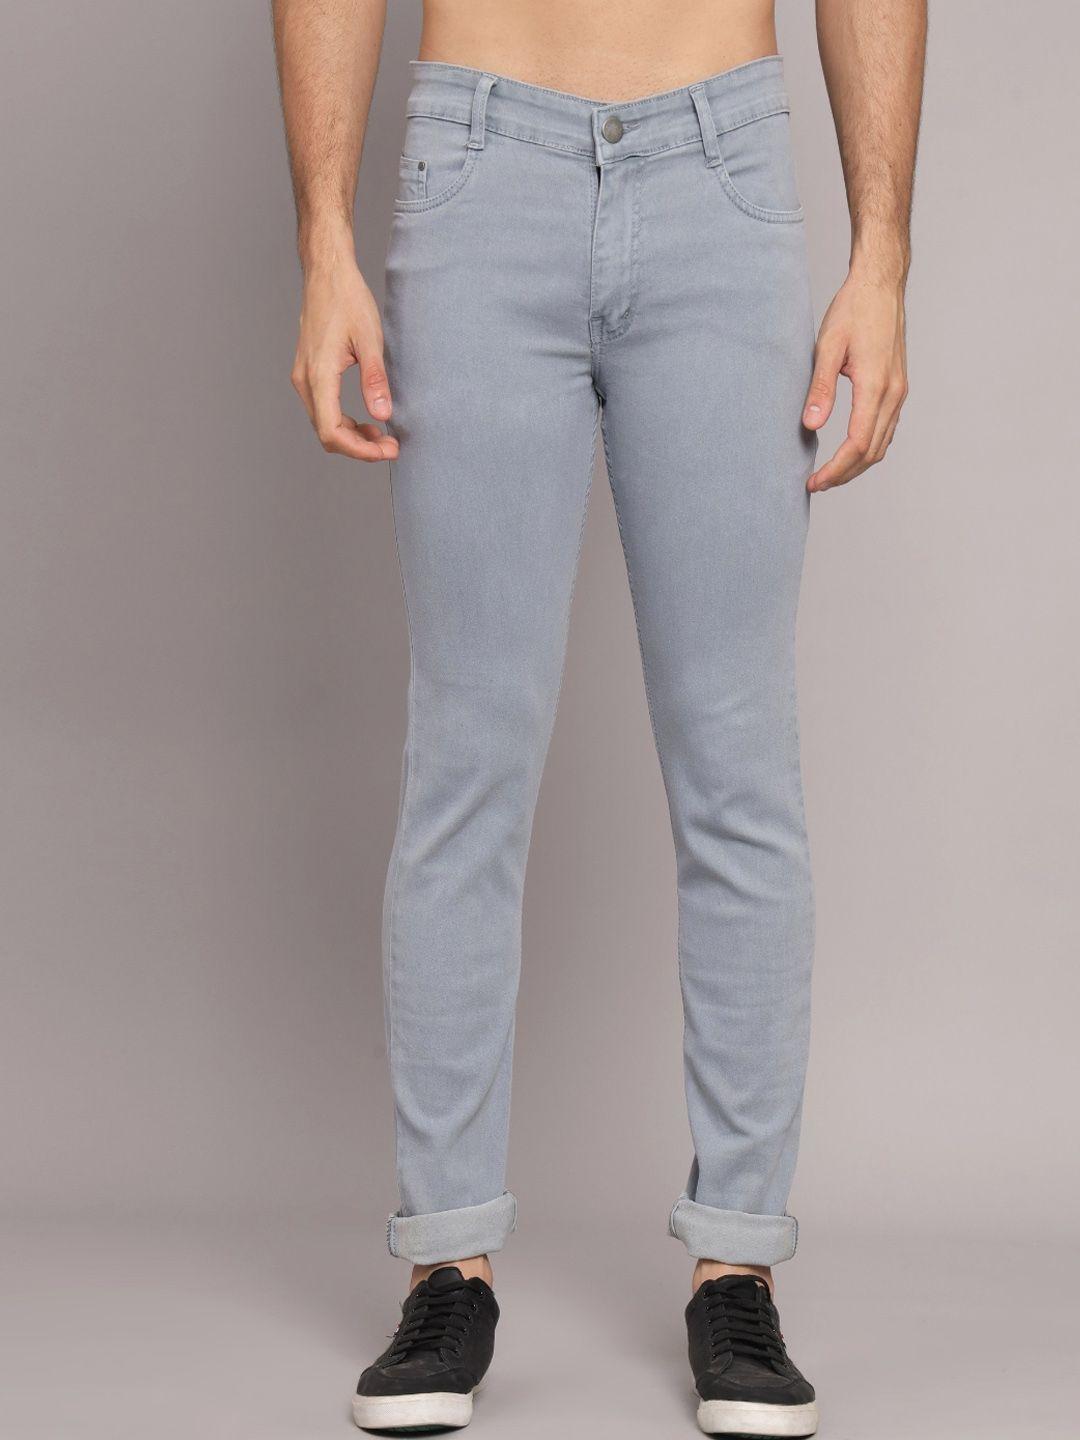 studio-nexx-men-grey-relaxed-fit-stretchable-jeans